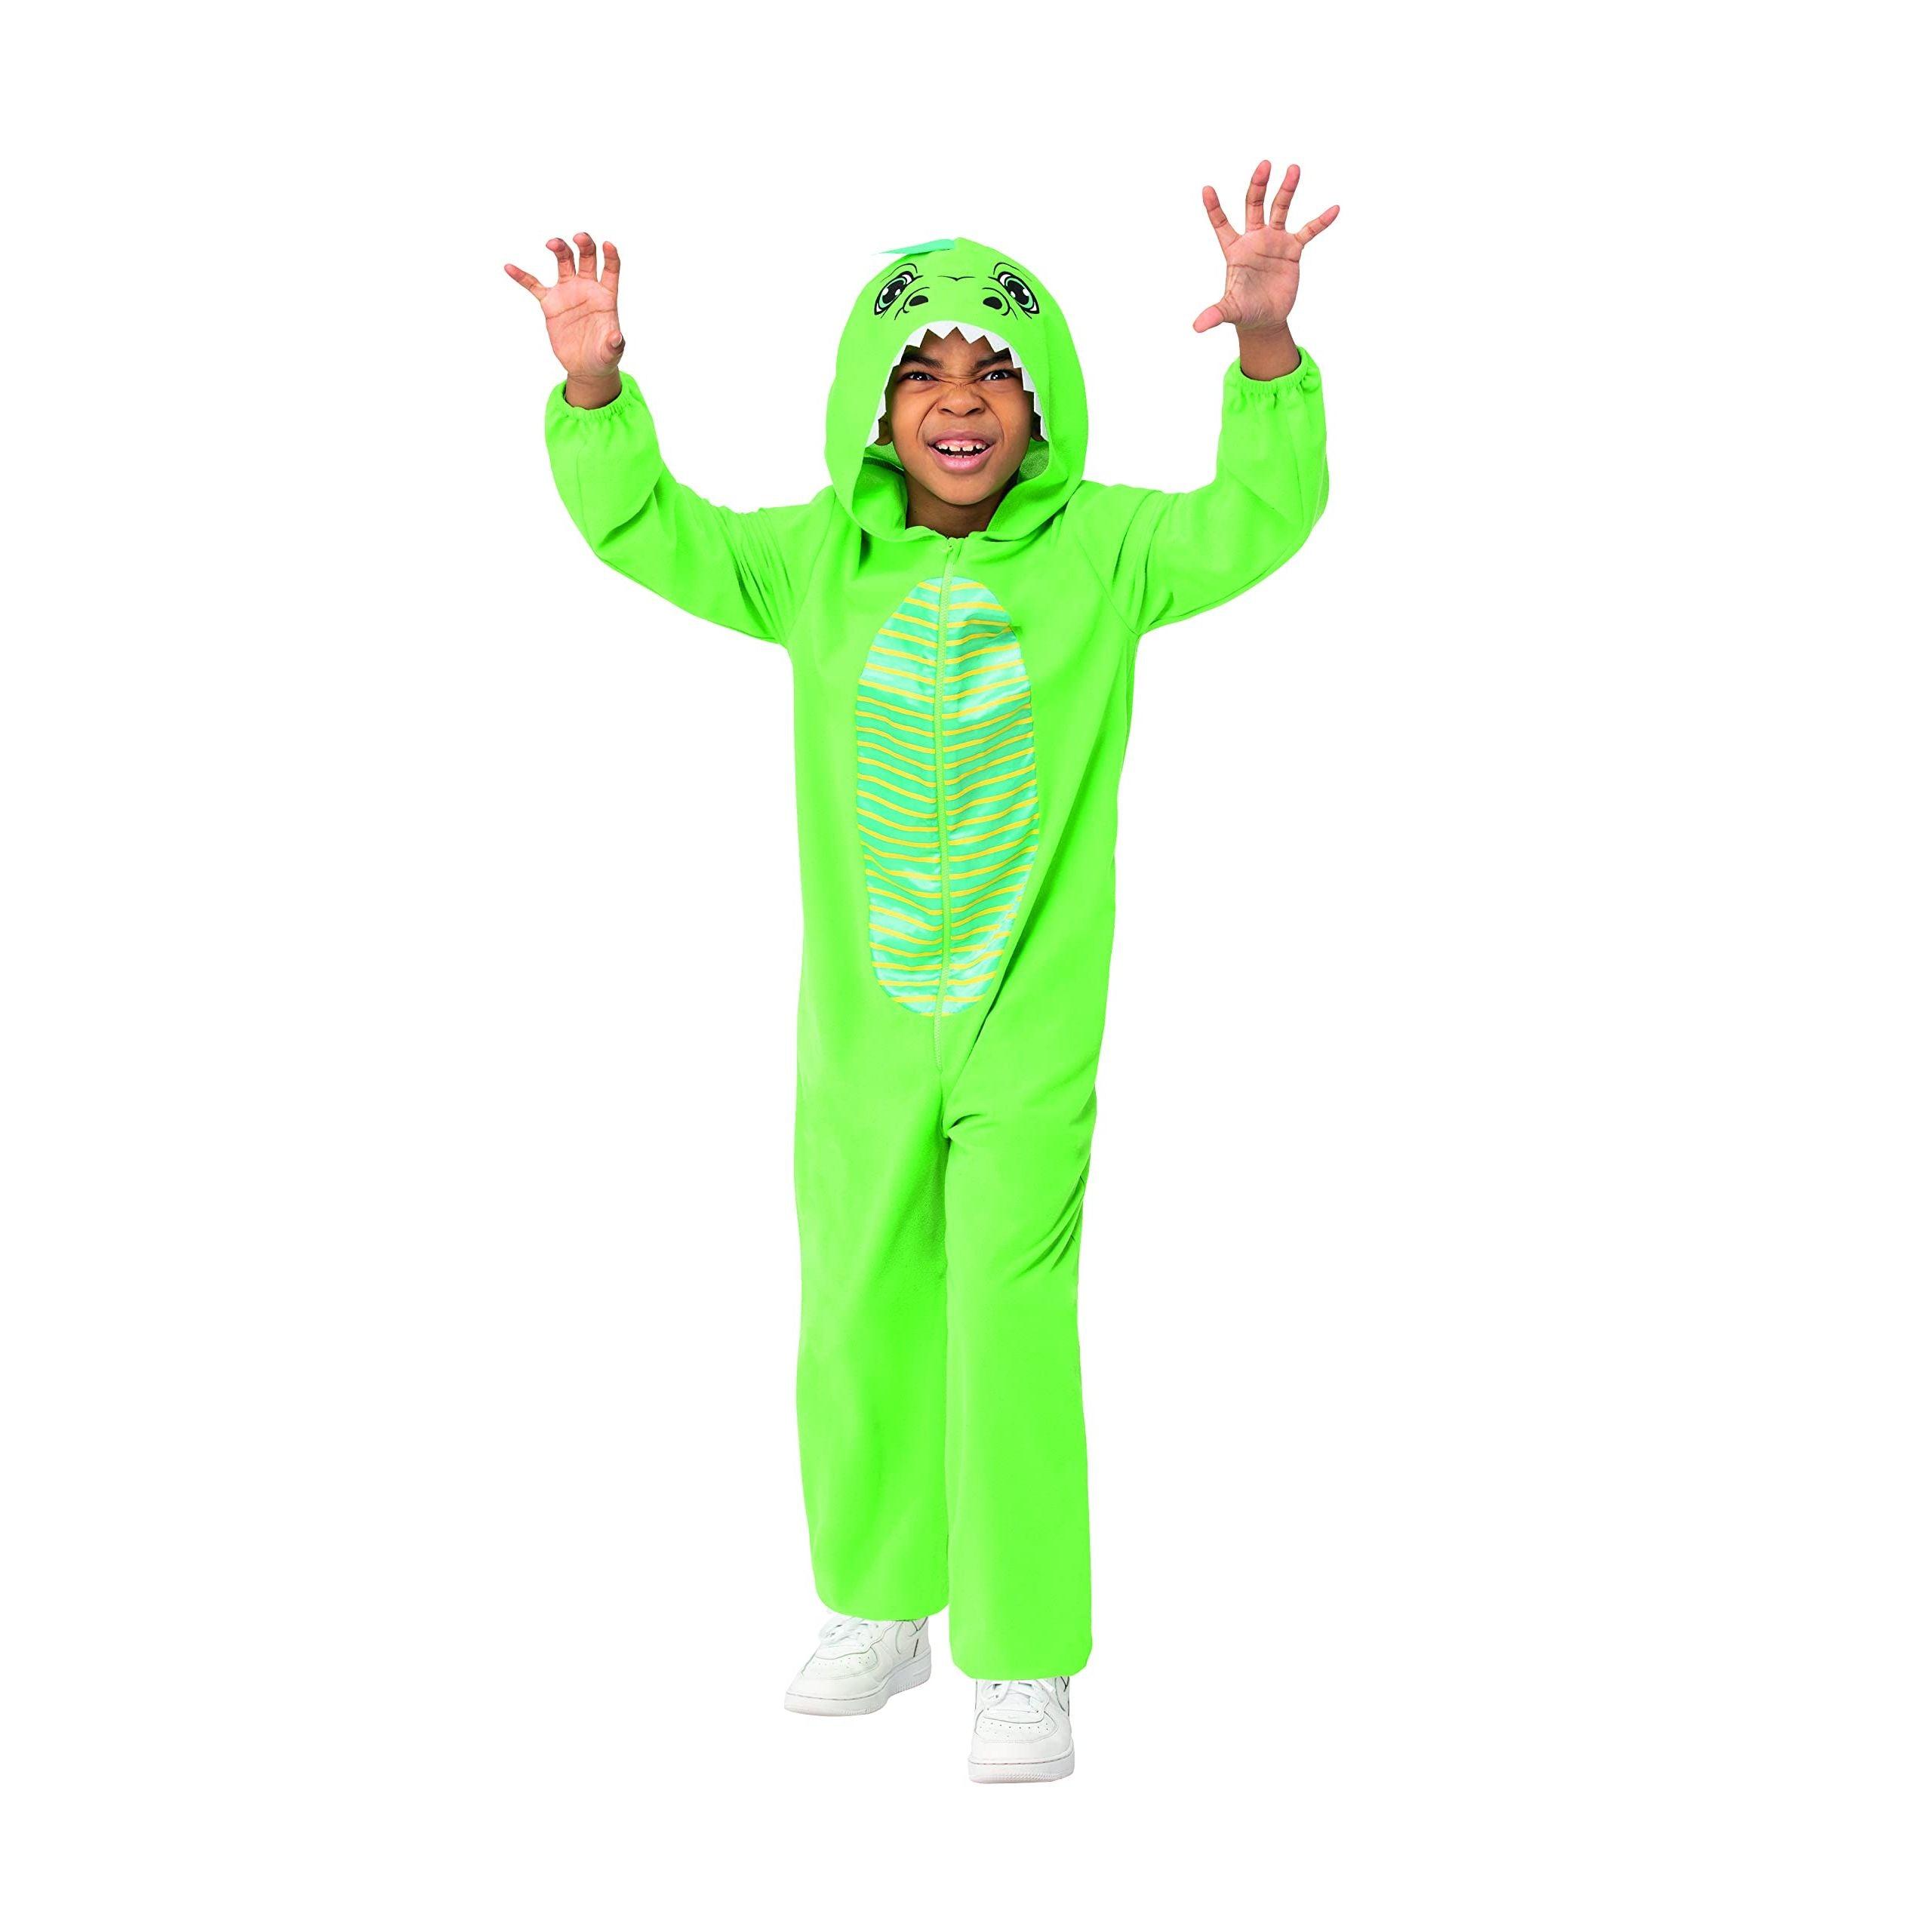 Costume & Party Kids Childs Dinosaur Costume Green (Age 4-6) 1